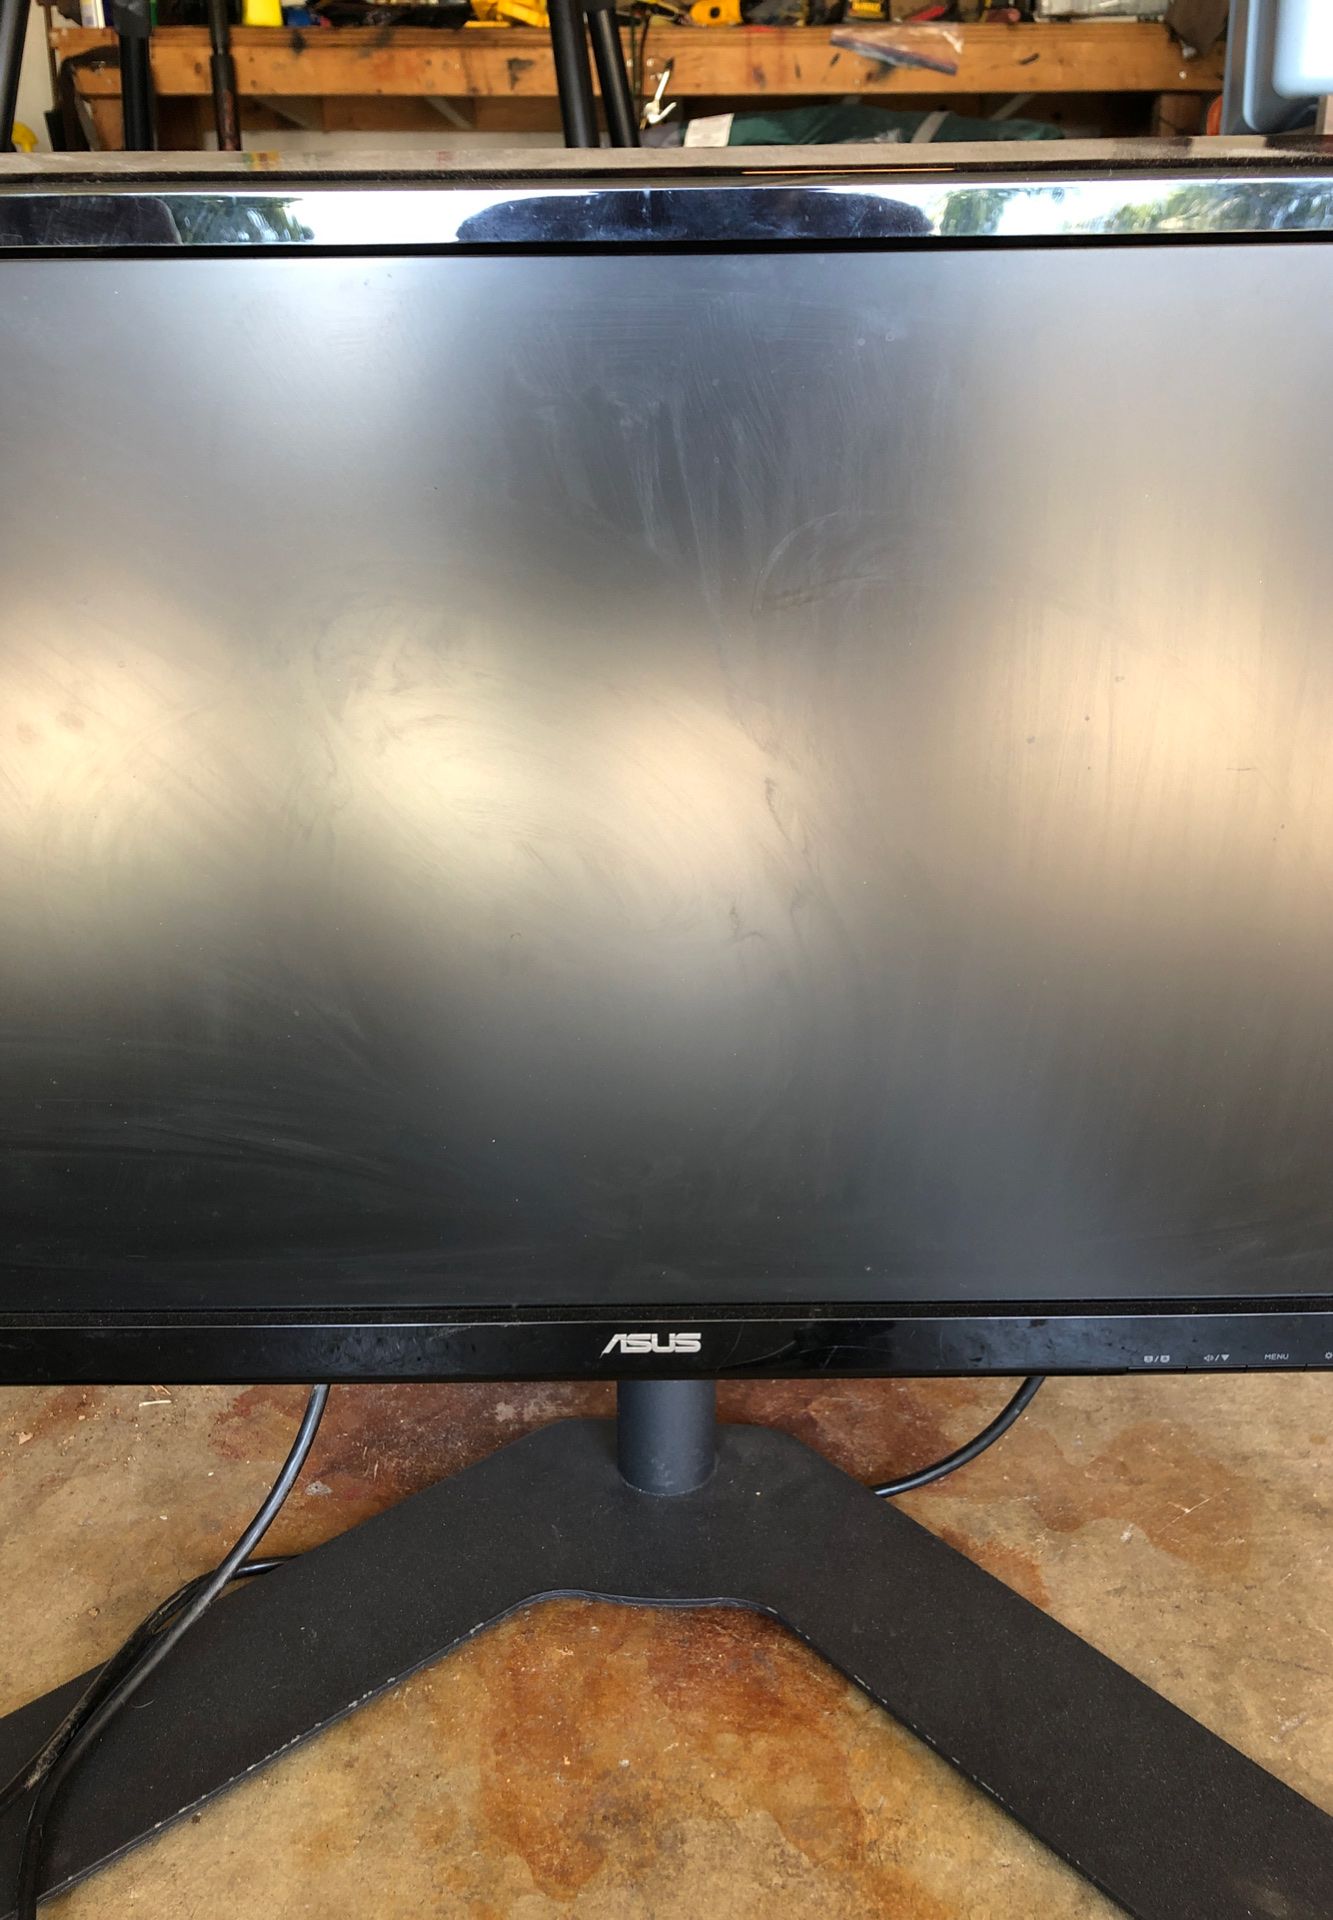 24” monitor and stand